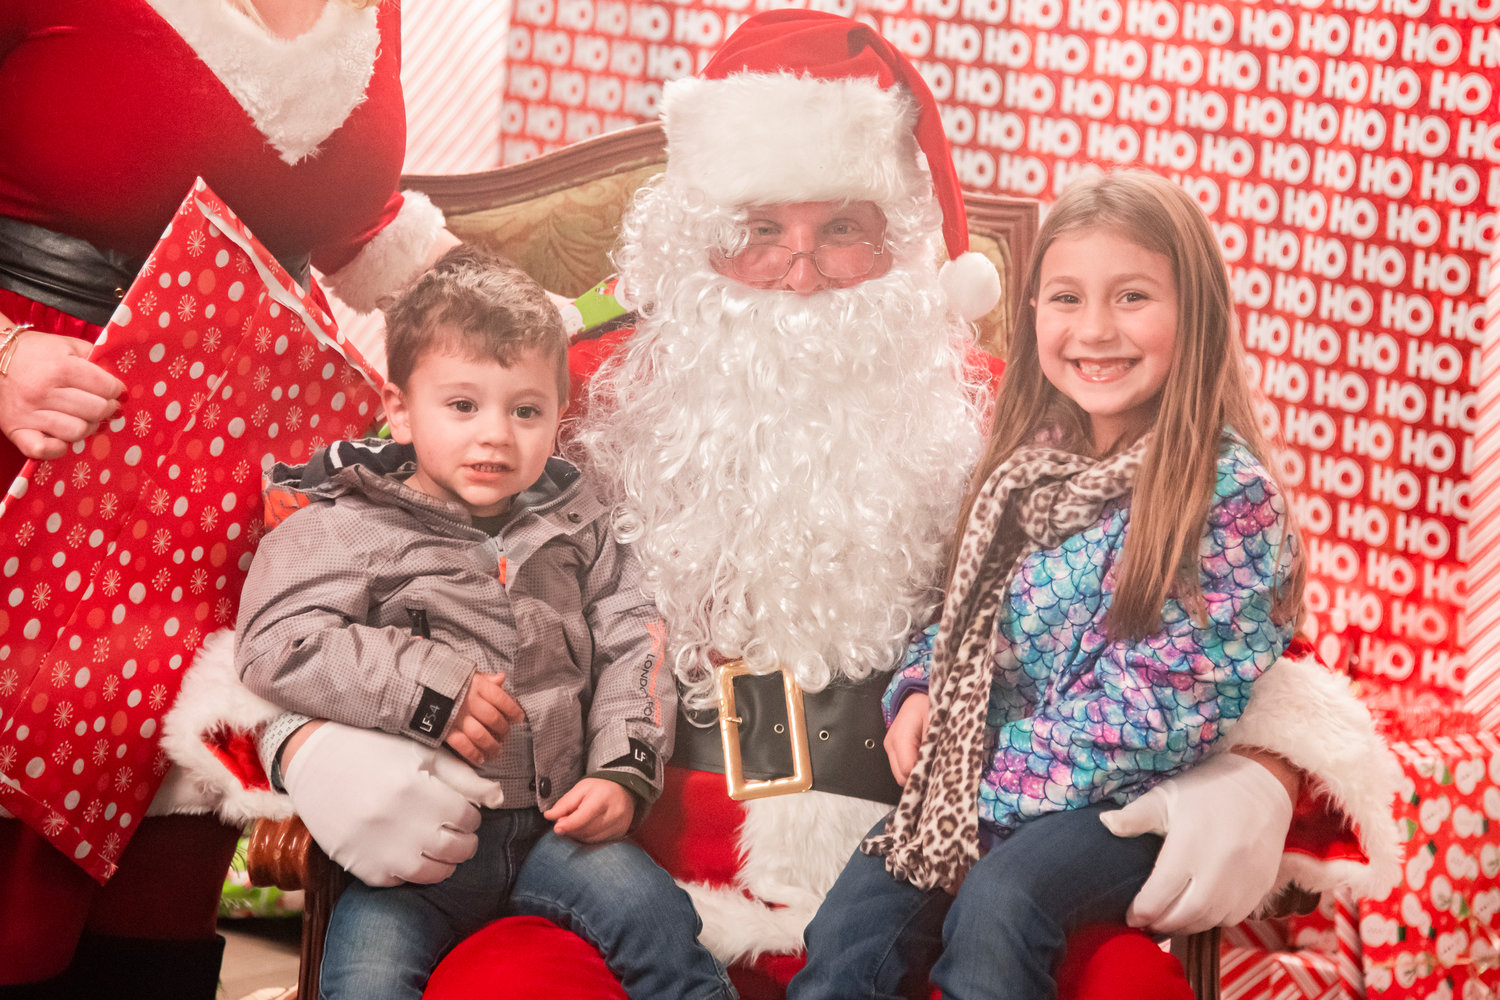 Carver, 2, and Piper, 6, smile and pose for a photo with Santa at the Adna Grocery Store on Saturday.